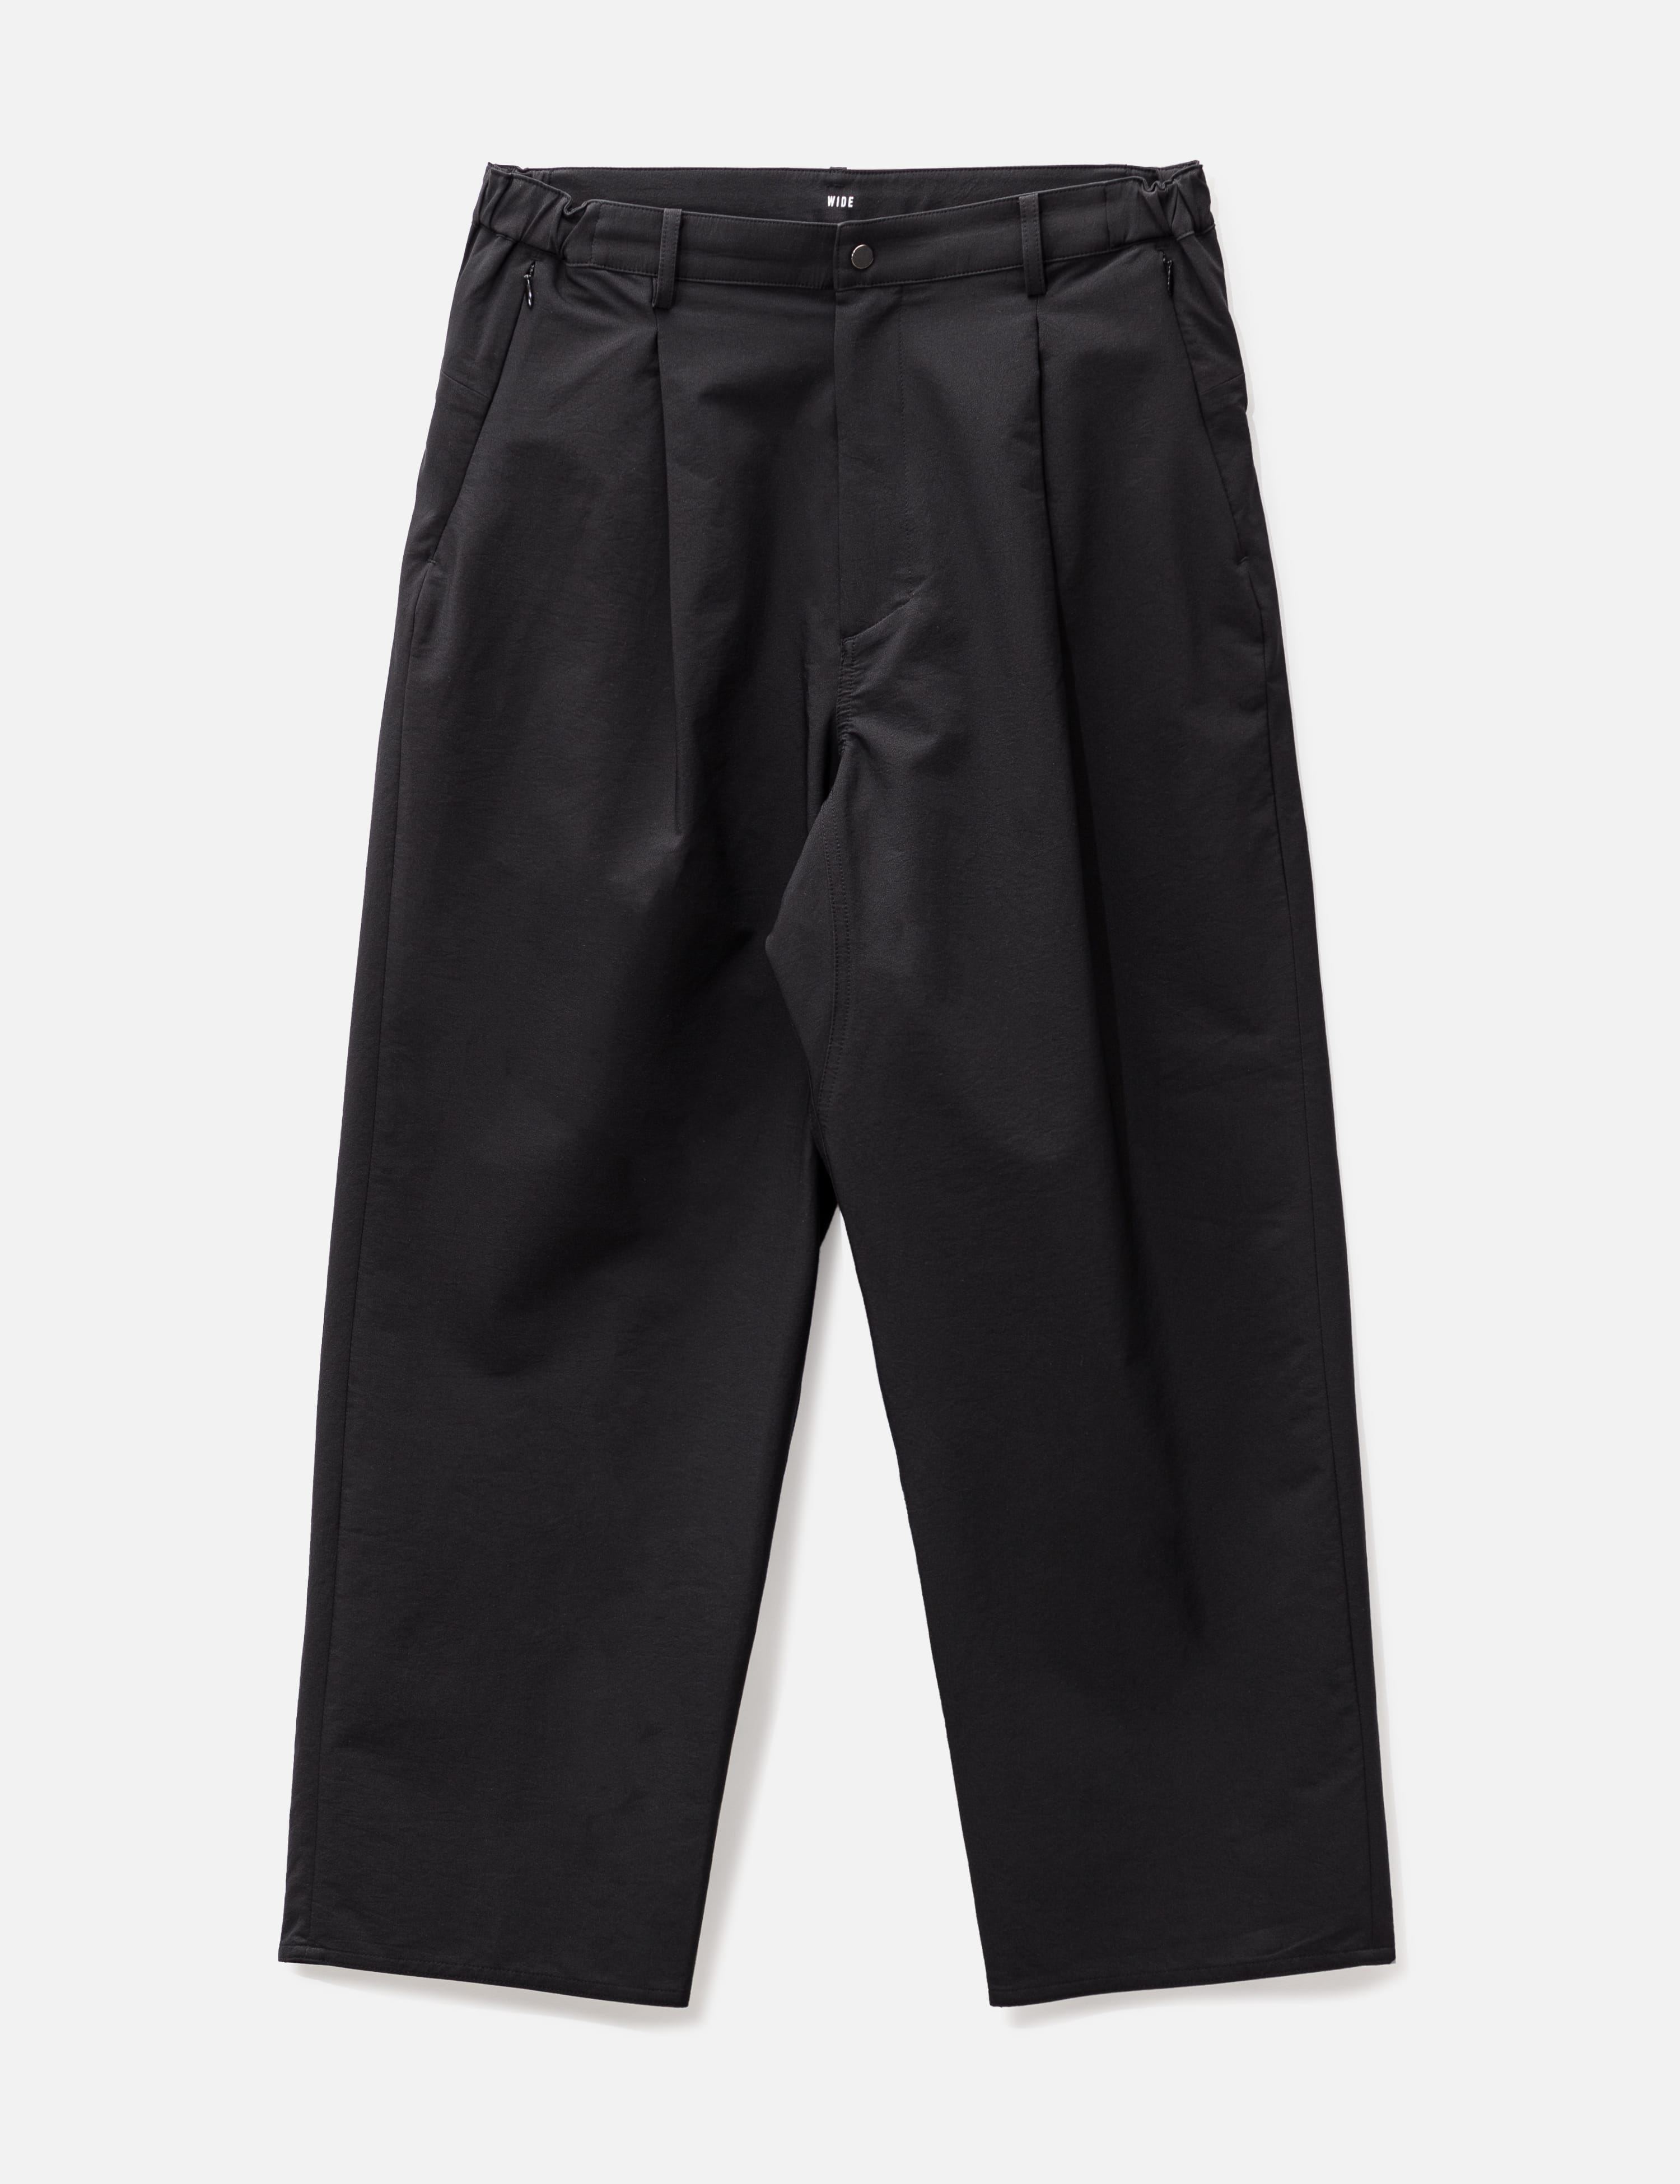 New Balance - New Balance Met24 Wide Pants | HBX - Globally Curated Fashion  and Lifestyle by Hypebeast